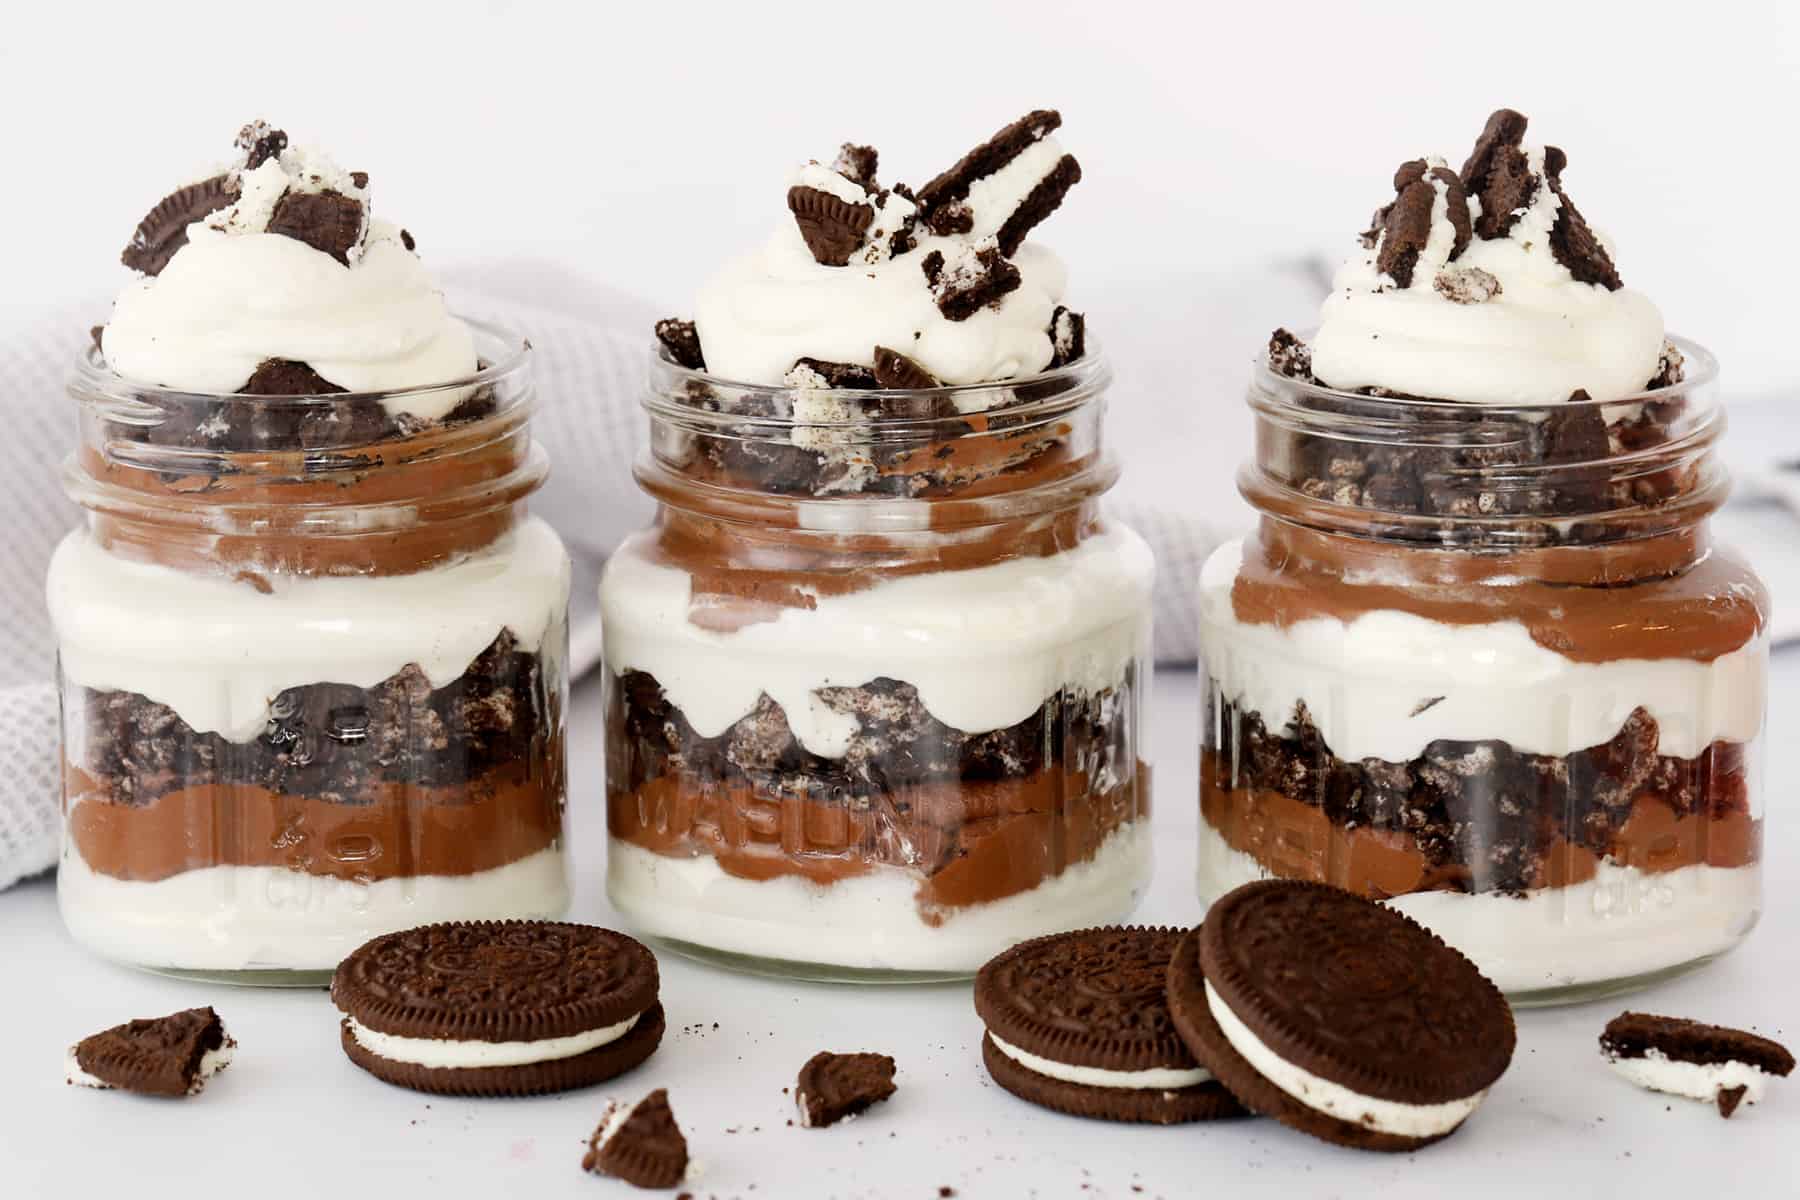 Three individual glass jars full of chocolate and oreo parfaits on a table.